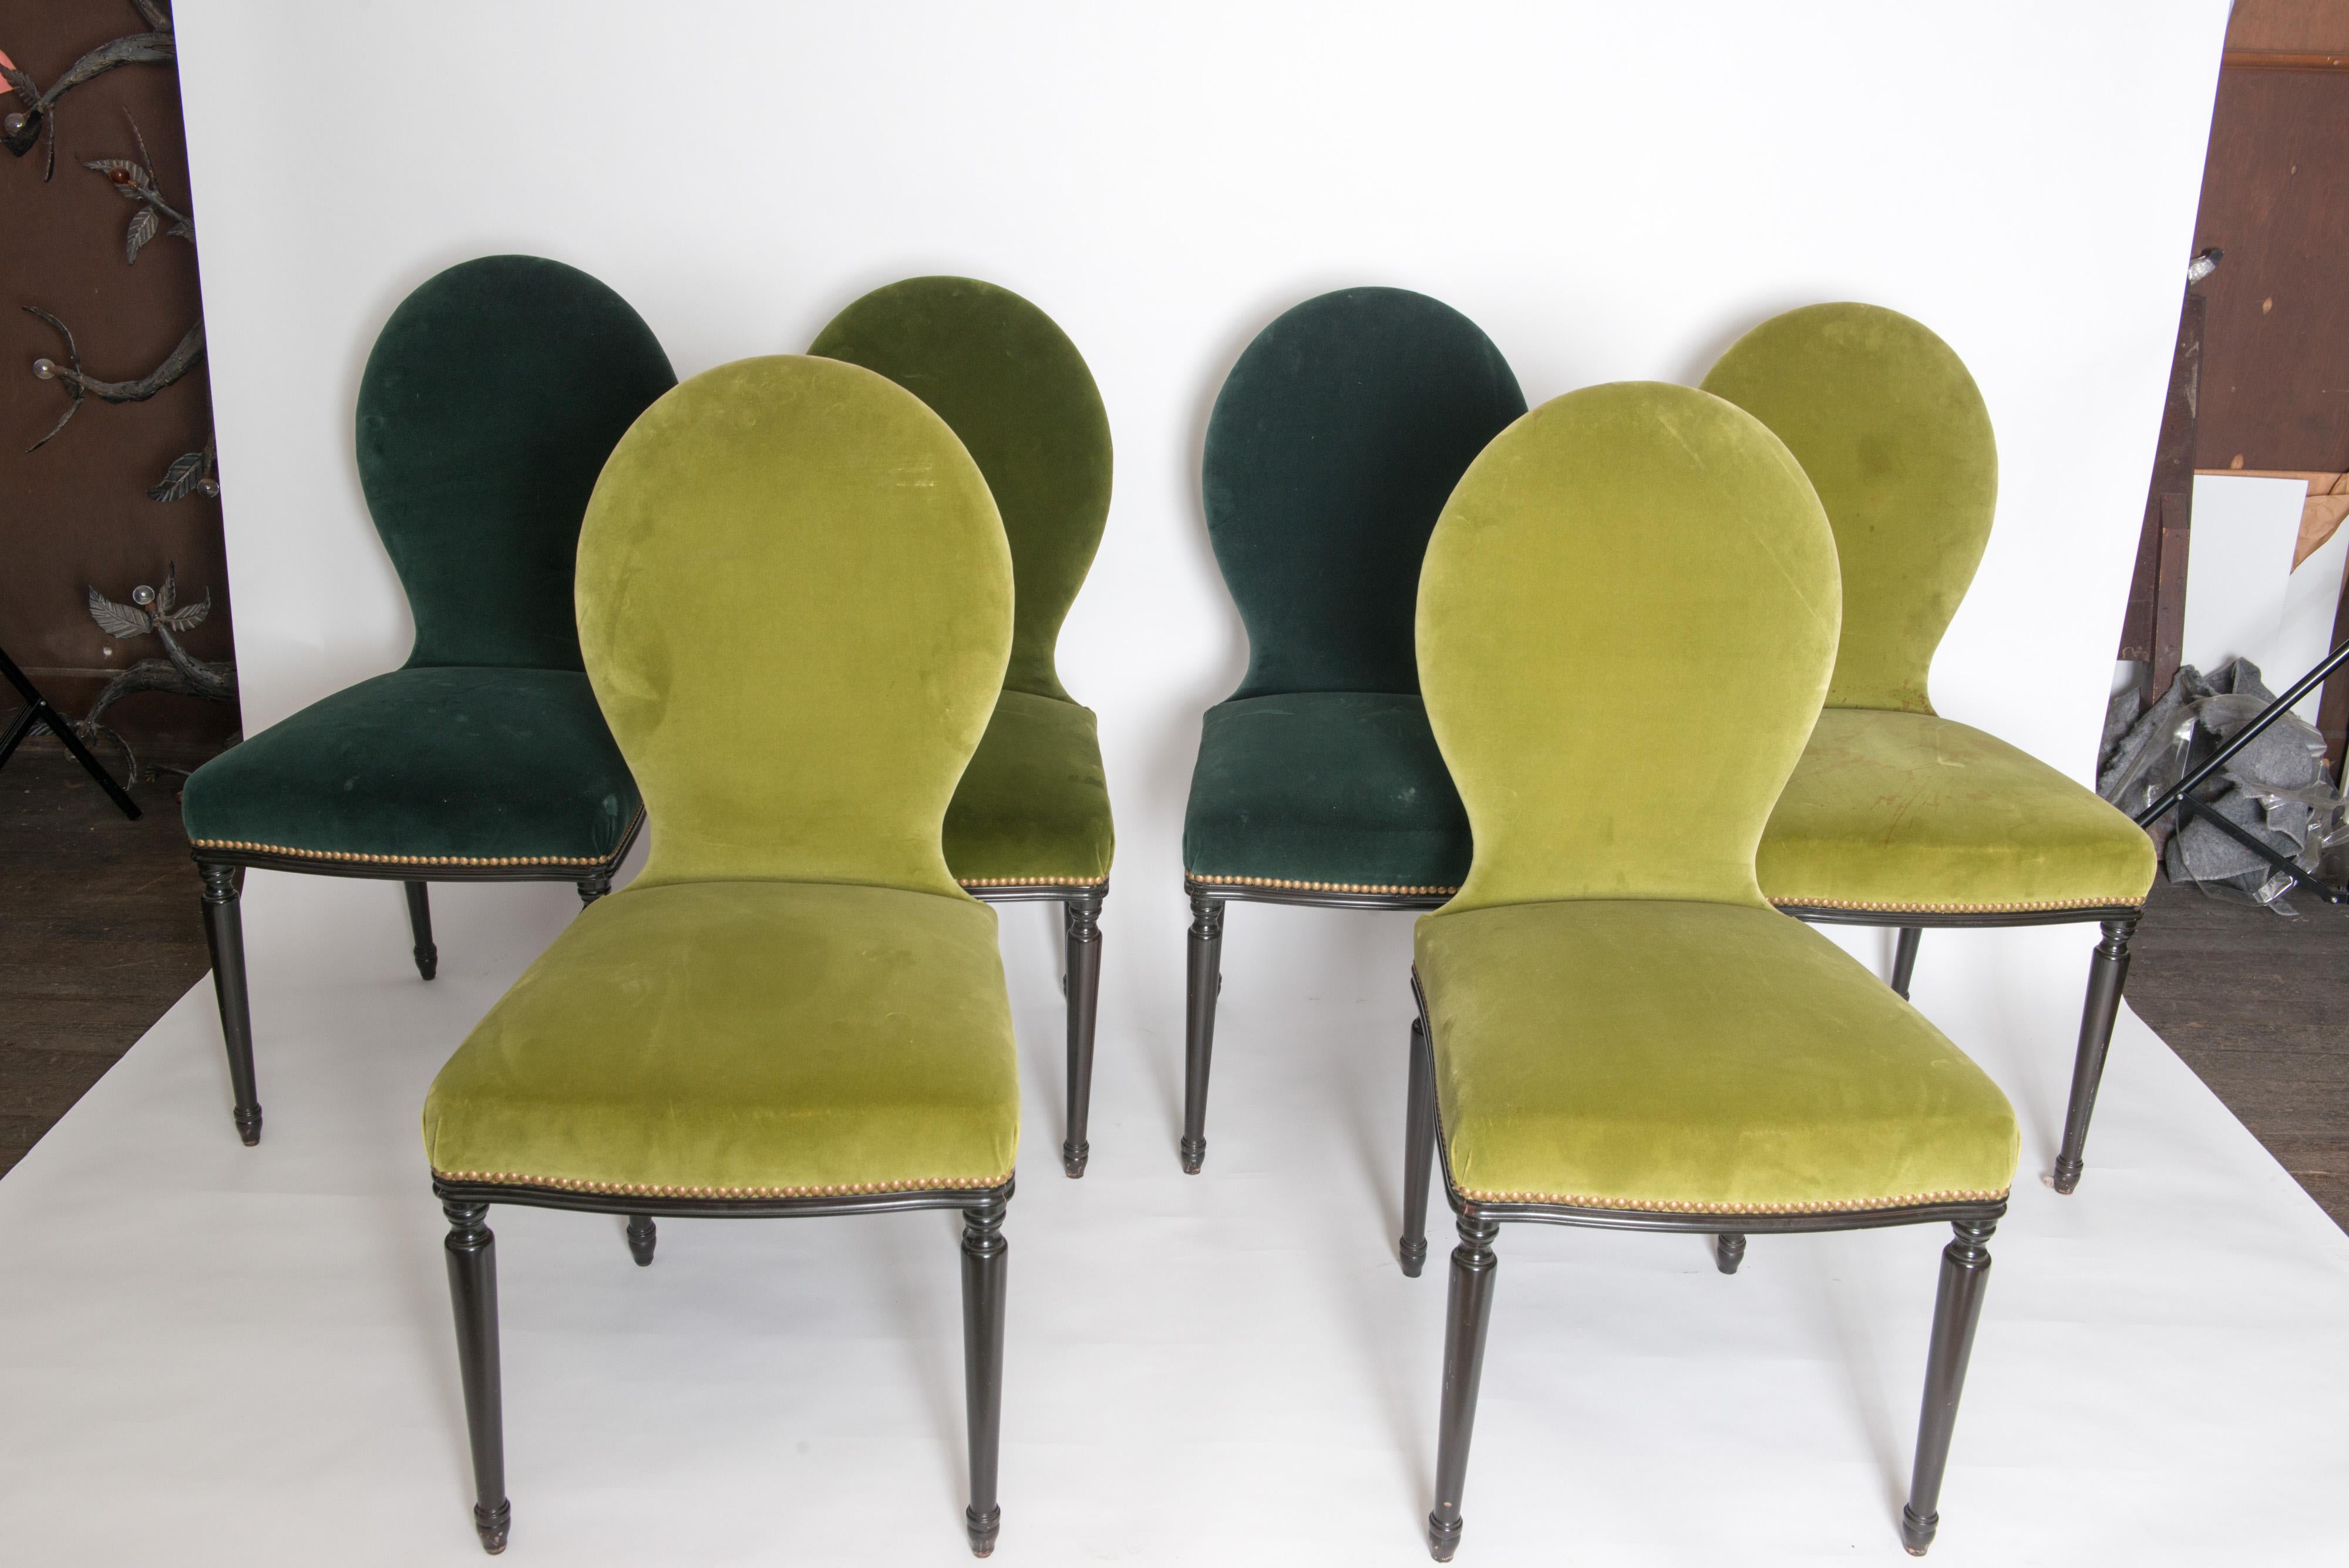 Sturdy set of six Georgian style dining chairs. They are covered in two different shades of green velvet. One chair has a large stain on it. It would be best to reupholster all chairs. The simple streamlined design of these chairs make them